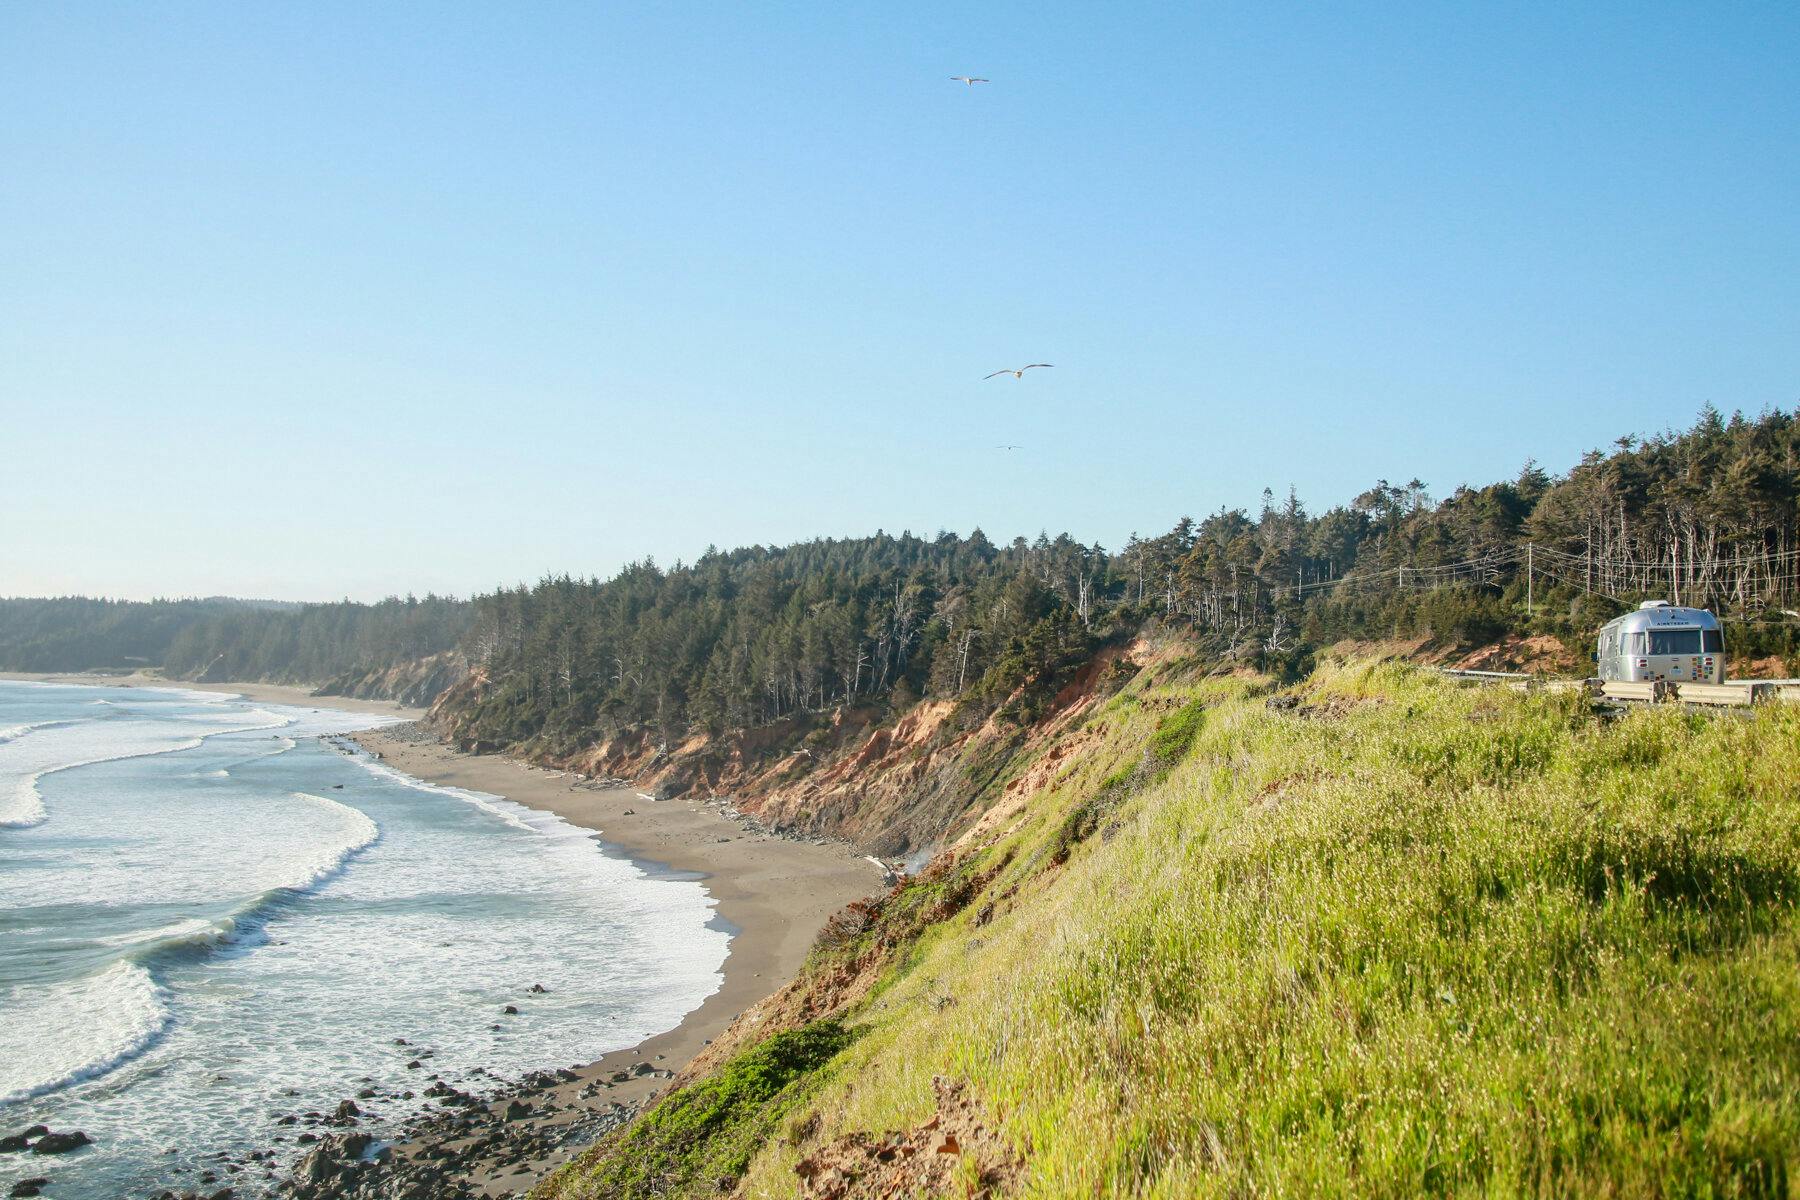 Oregon Coast Spots: 4 Amazing Places to Visit in 4 Days